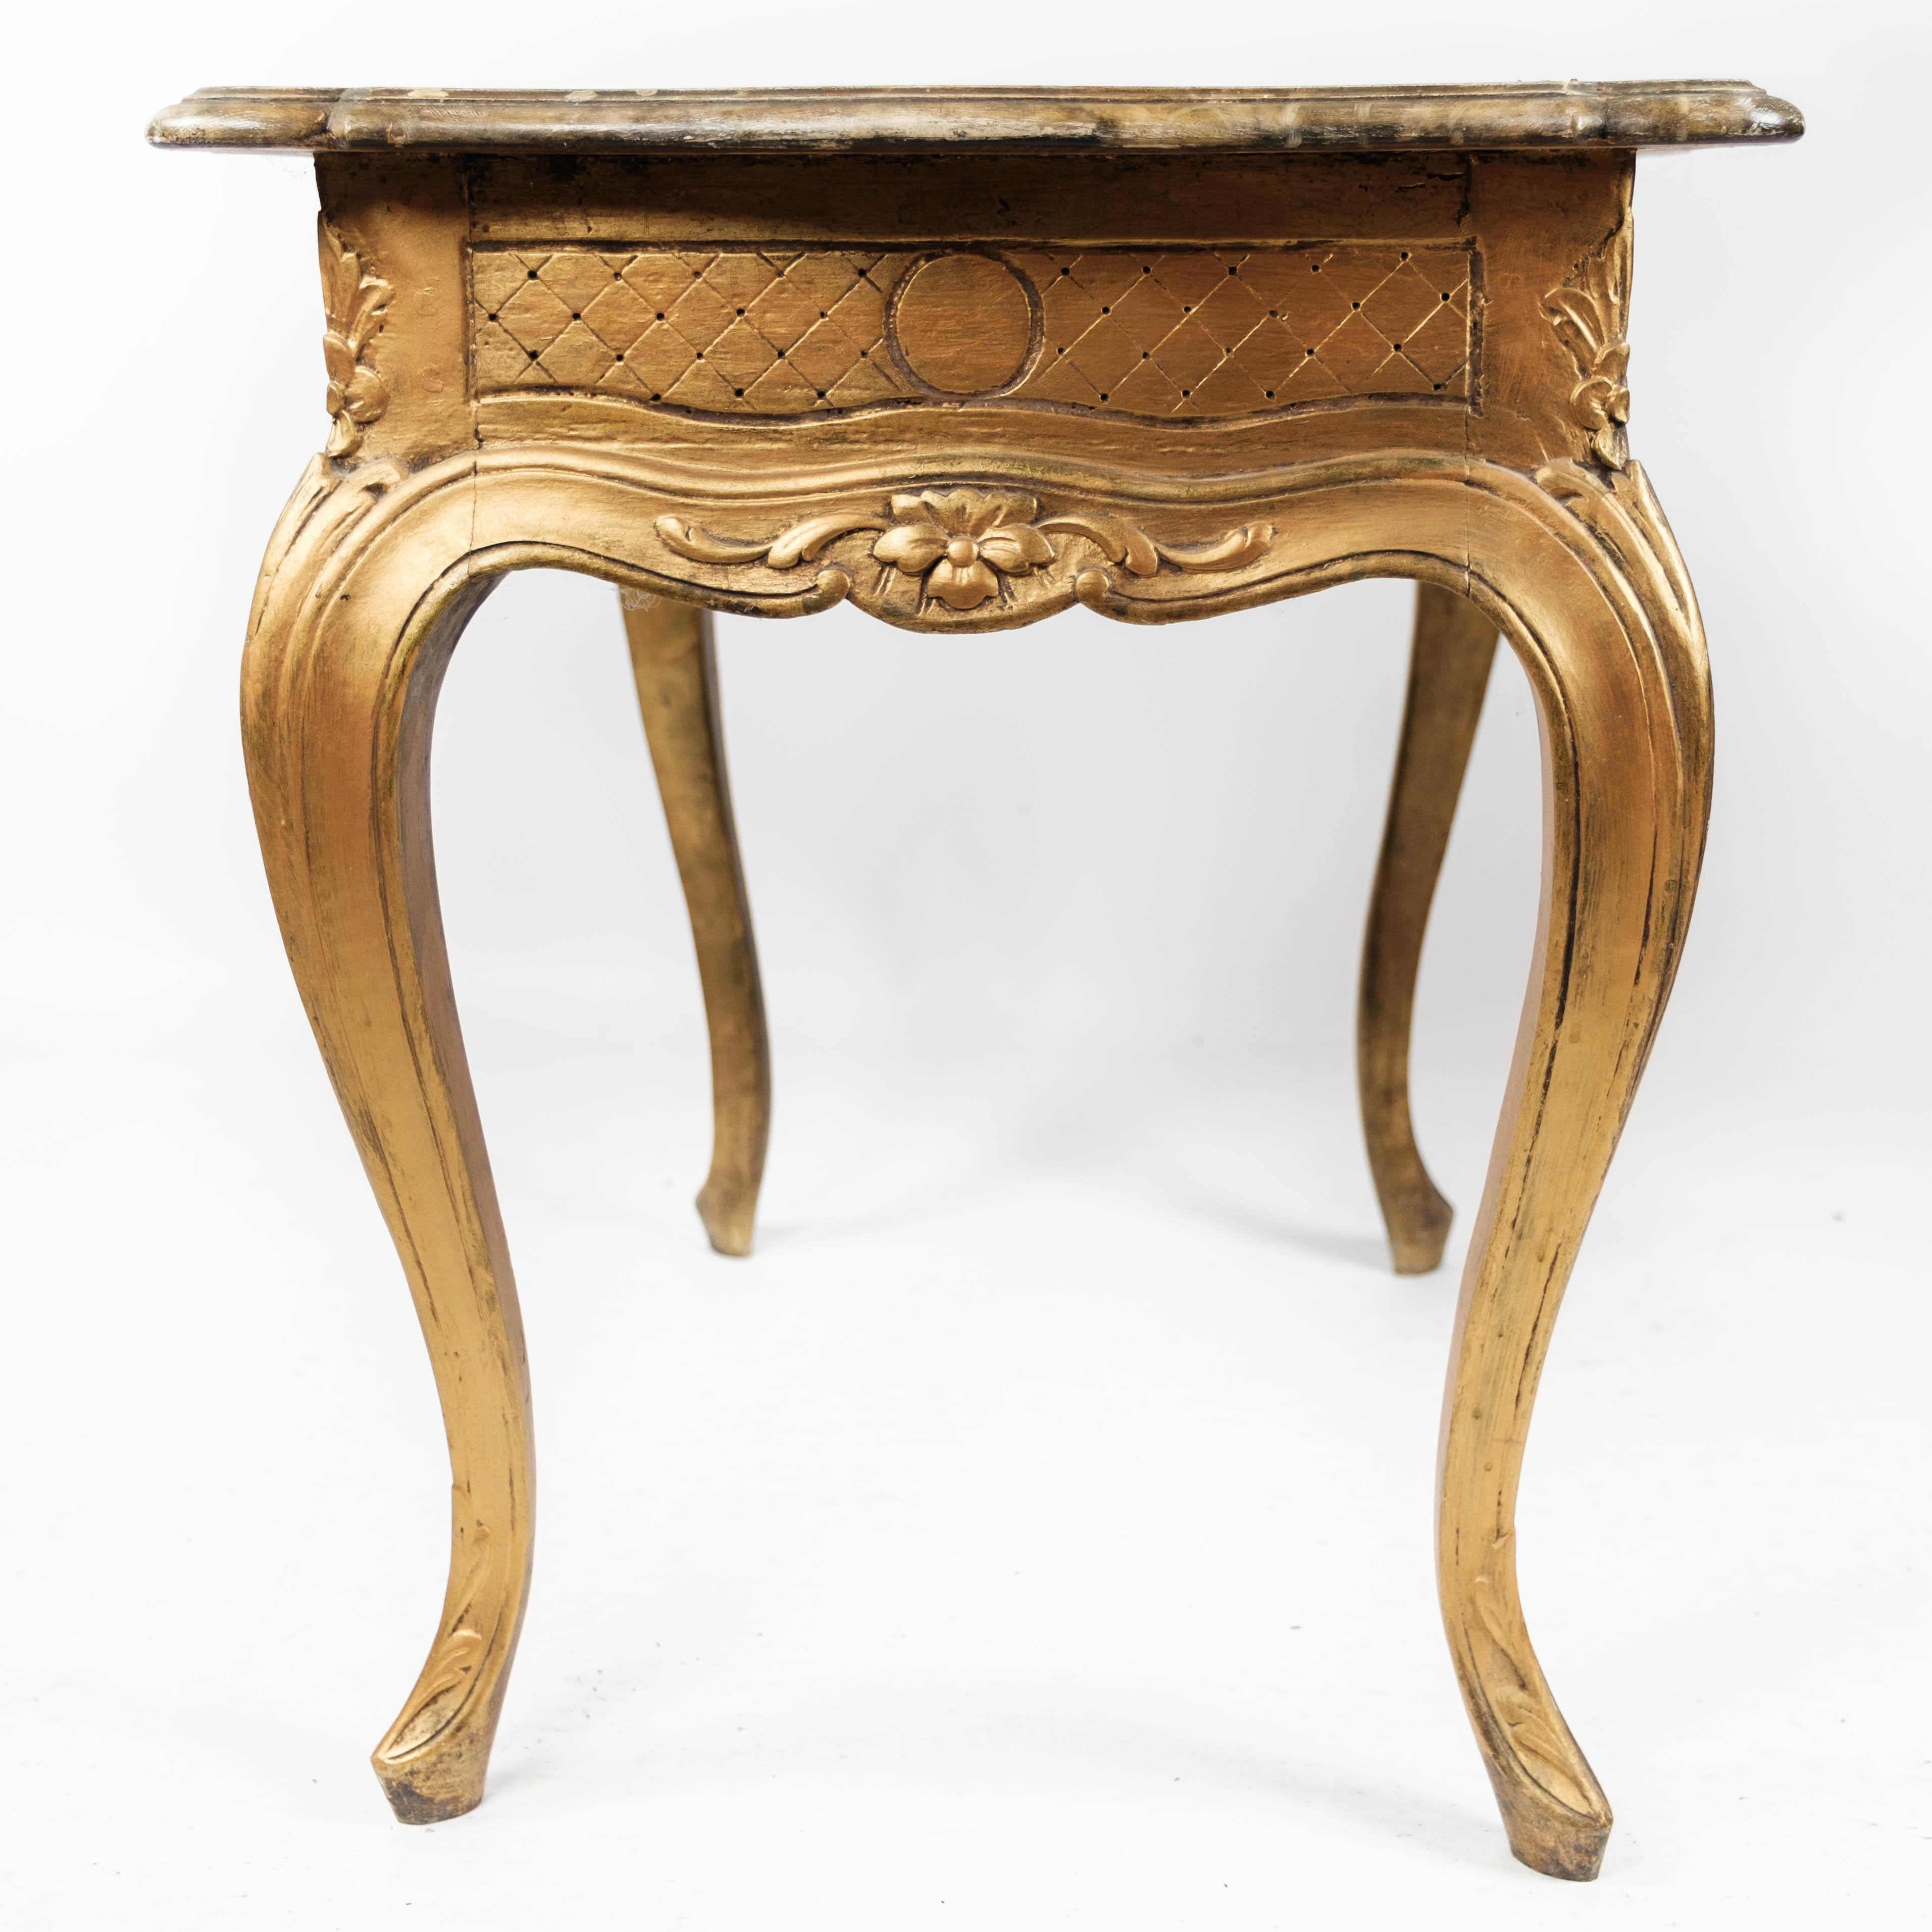 Rococo Revival Side Table with Marbled Tabletop and Frame of Gilded Wood, 1860s For Sale 3